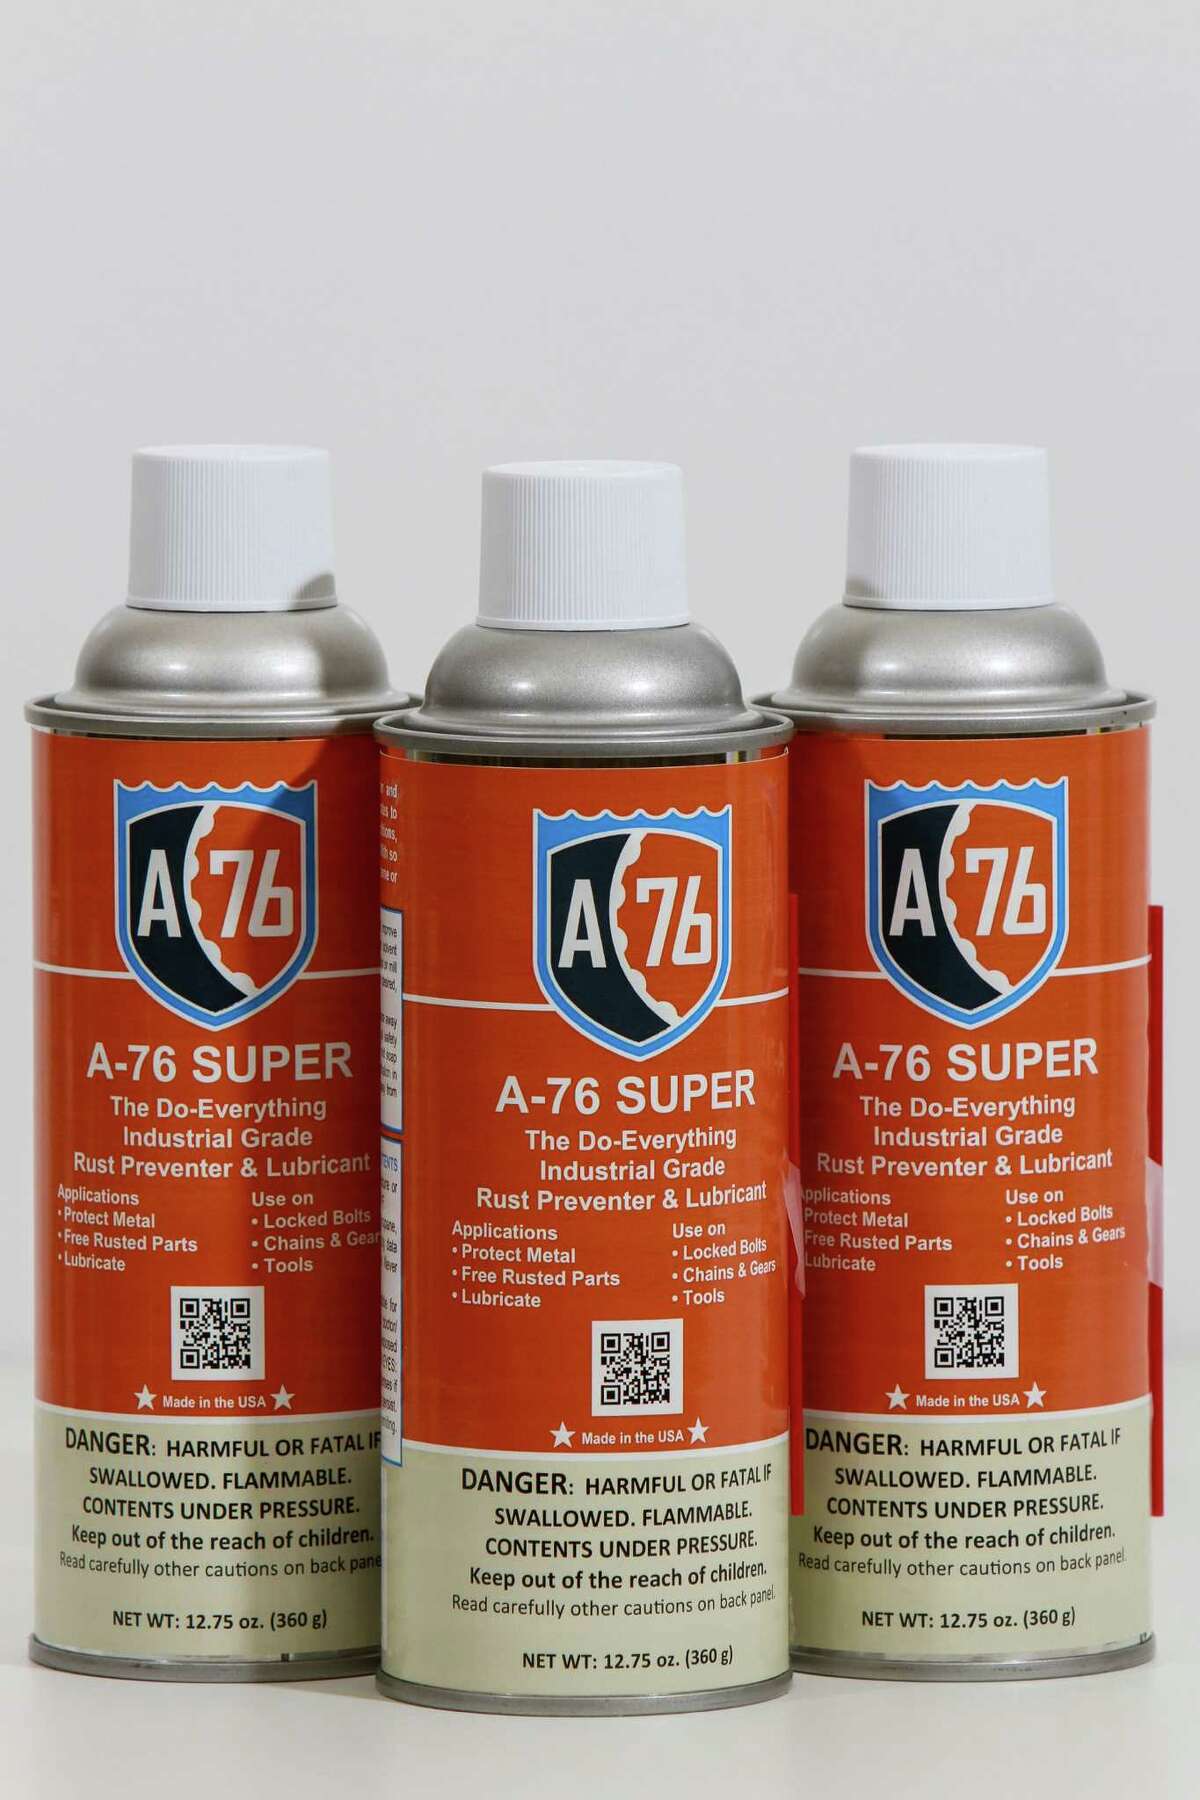 A-76 Technologies aerosol. (For the Chronicle/Gary Fountain, May 20, 2016)